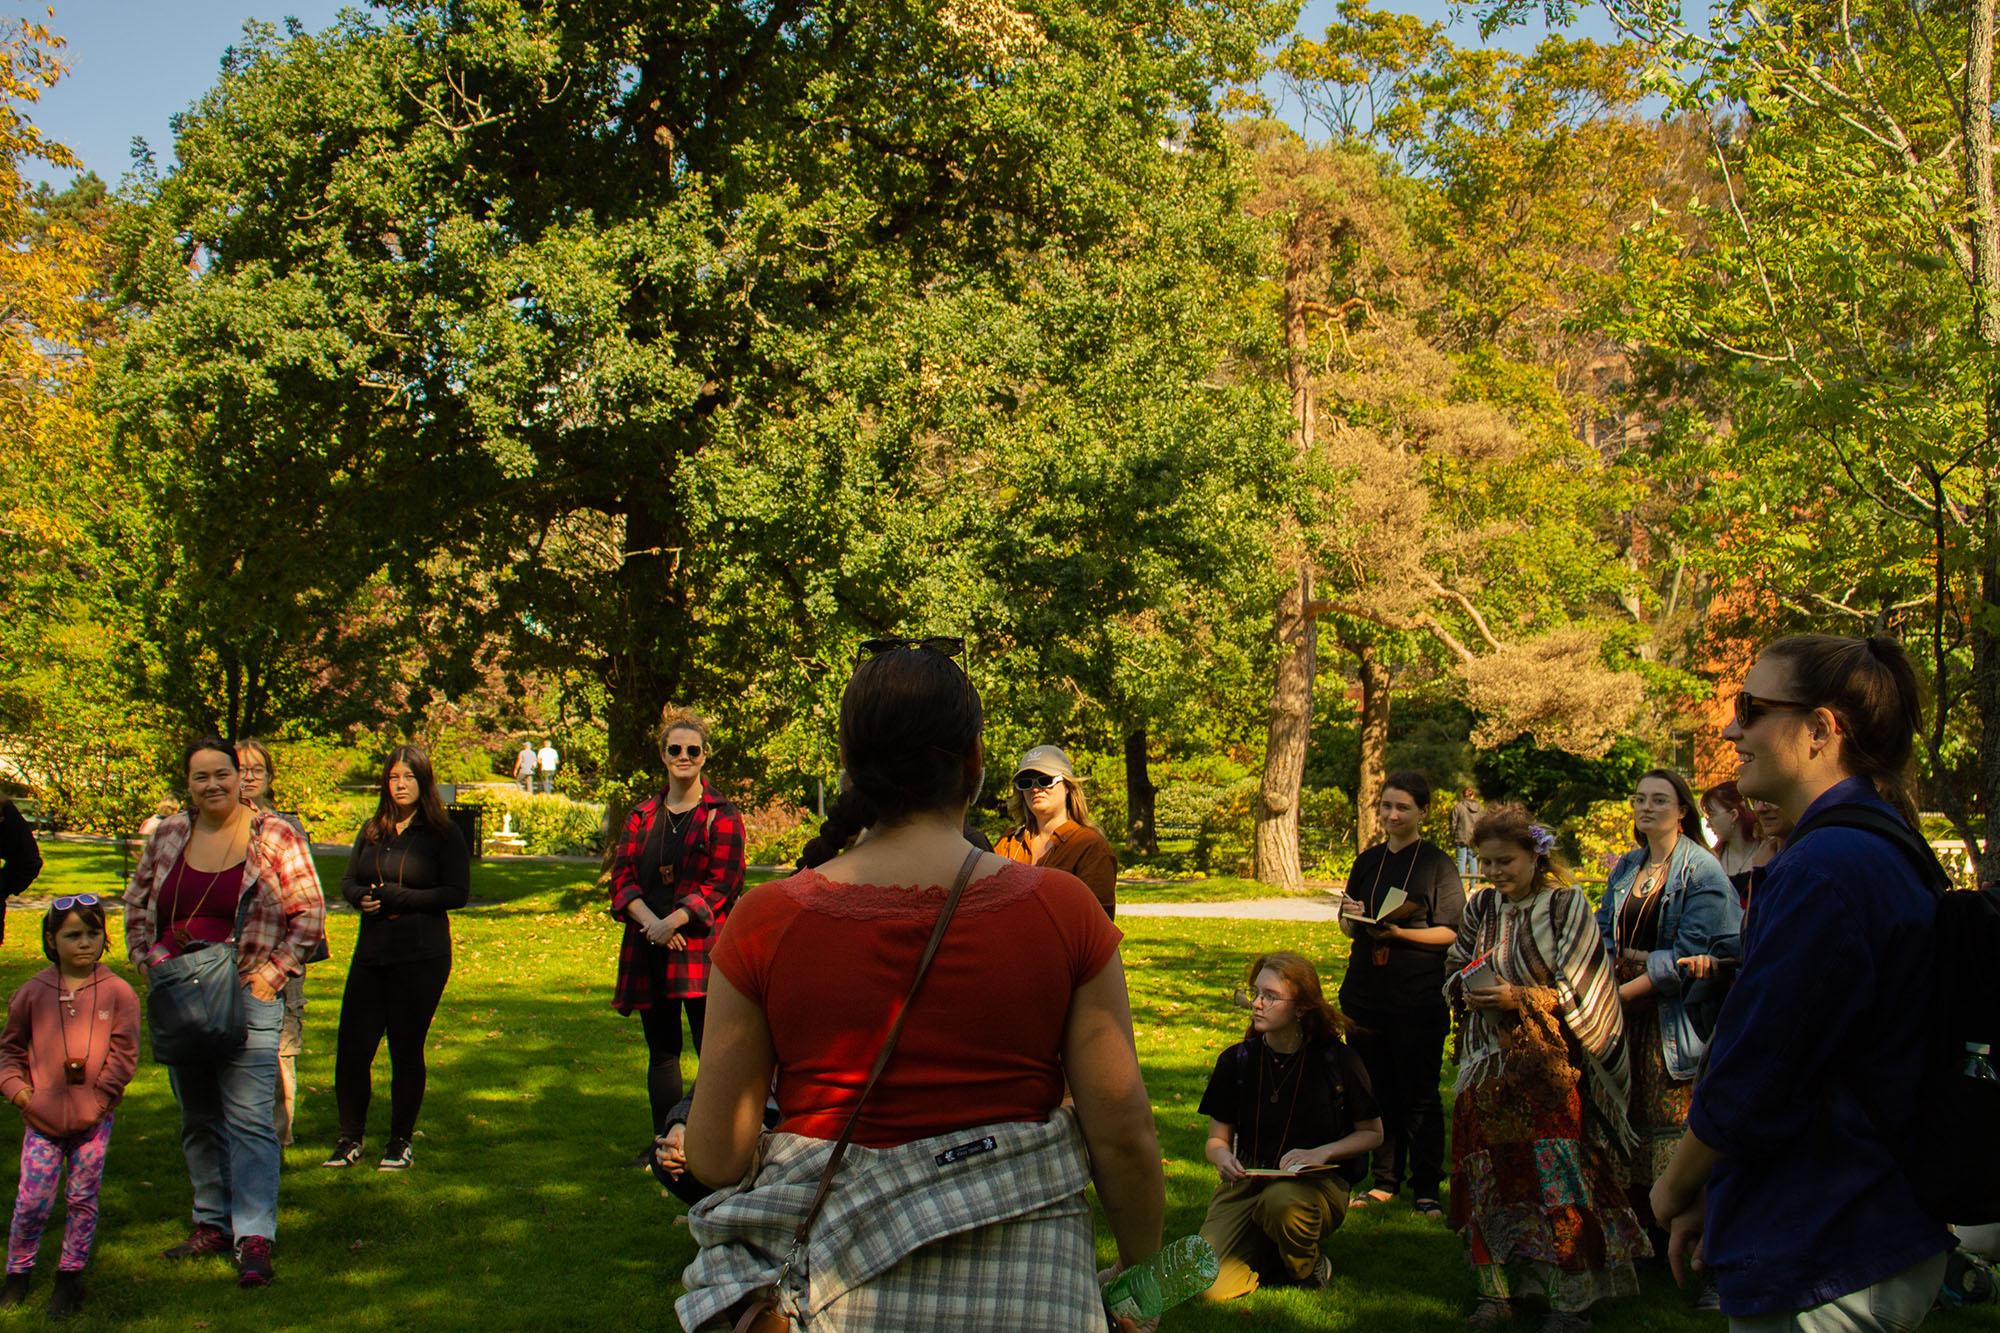 [ID: "Difficult Histories Walk participants at the Halifax Public Gardens gathered in a circle discussing."]